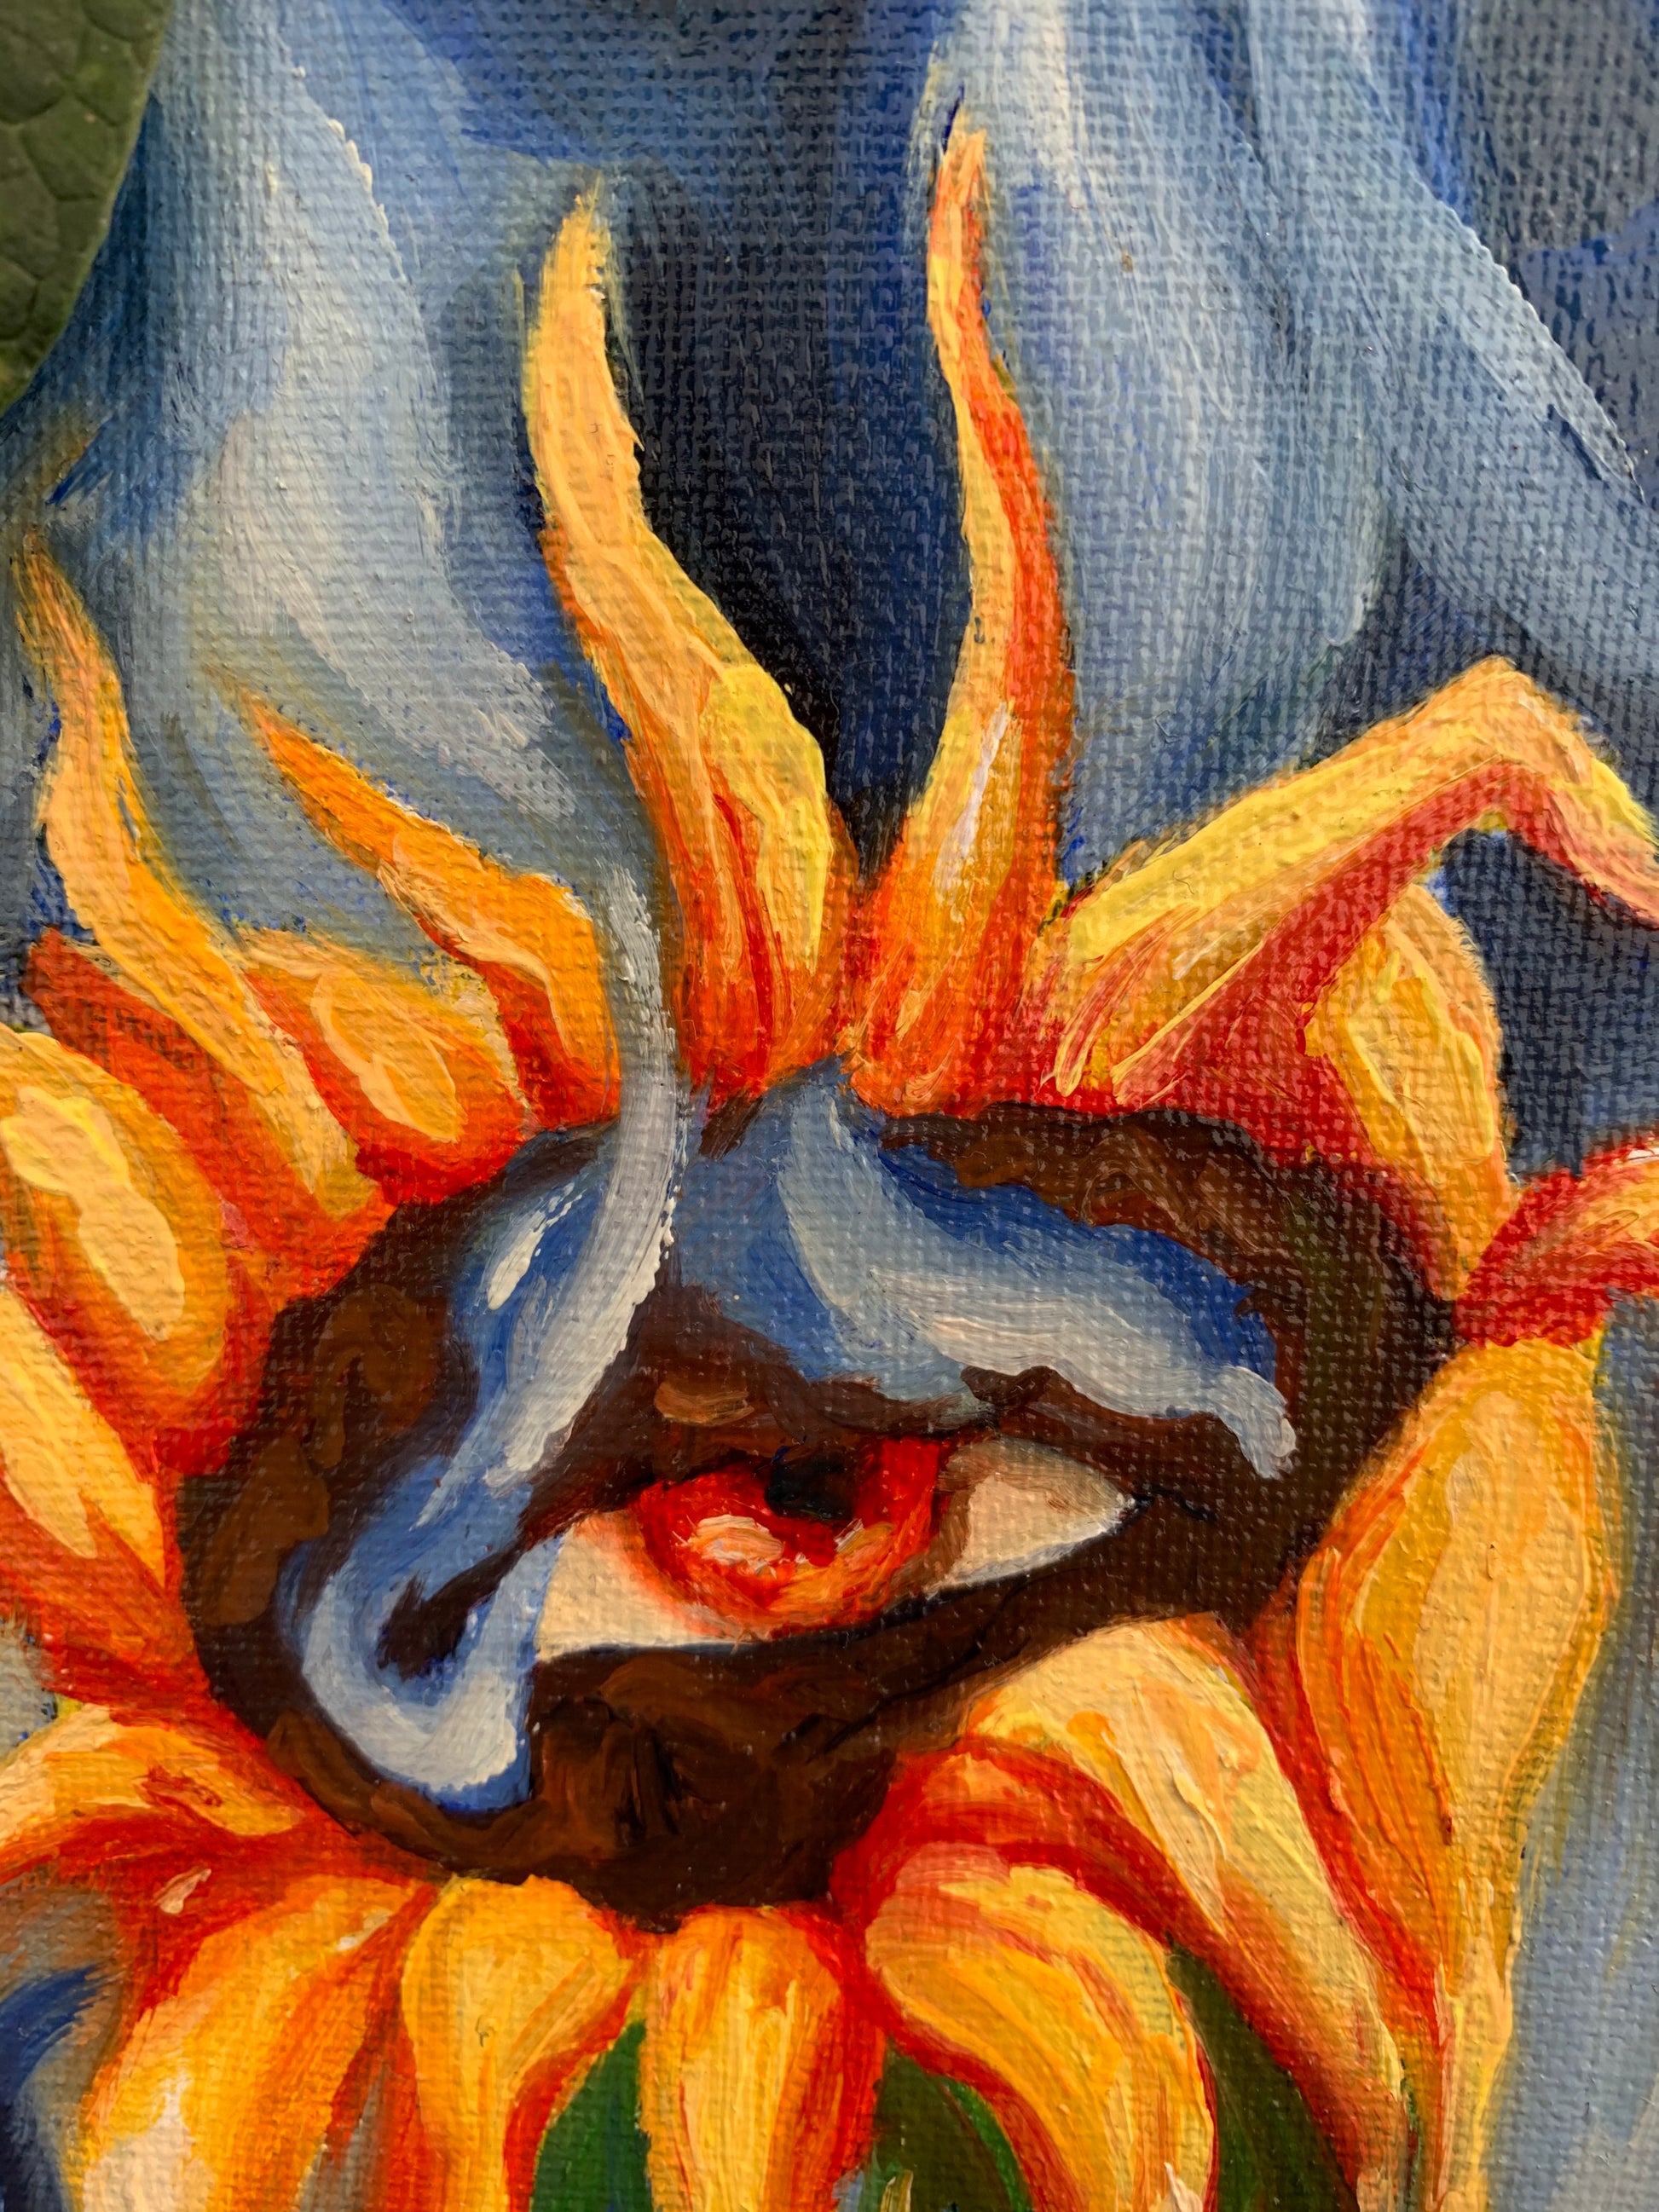 Flaming Chu Original Painting - Perry Picasshoe Official Site